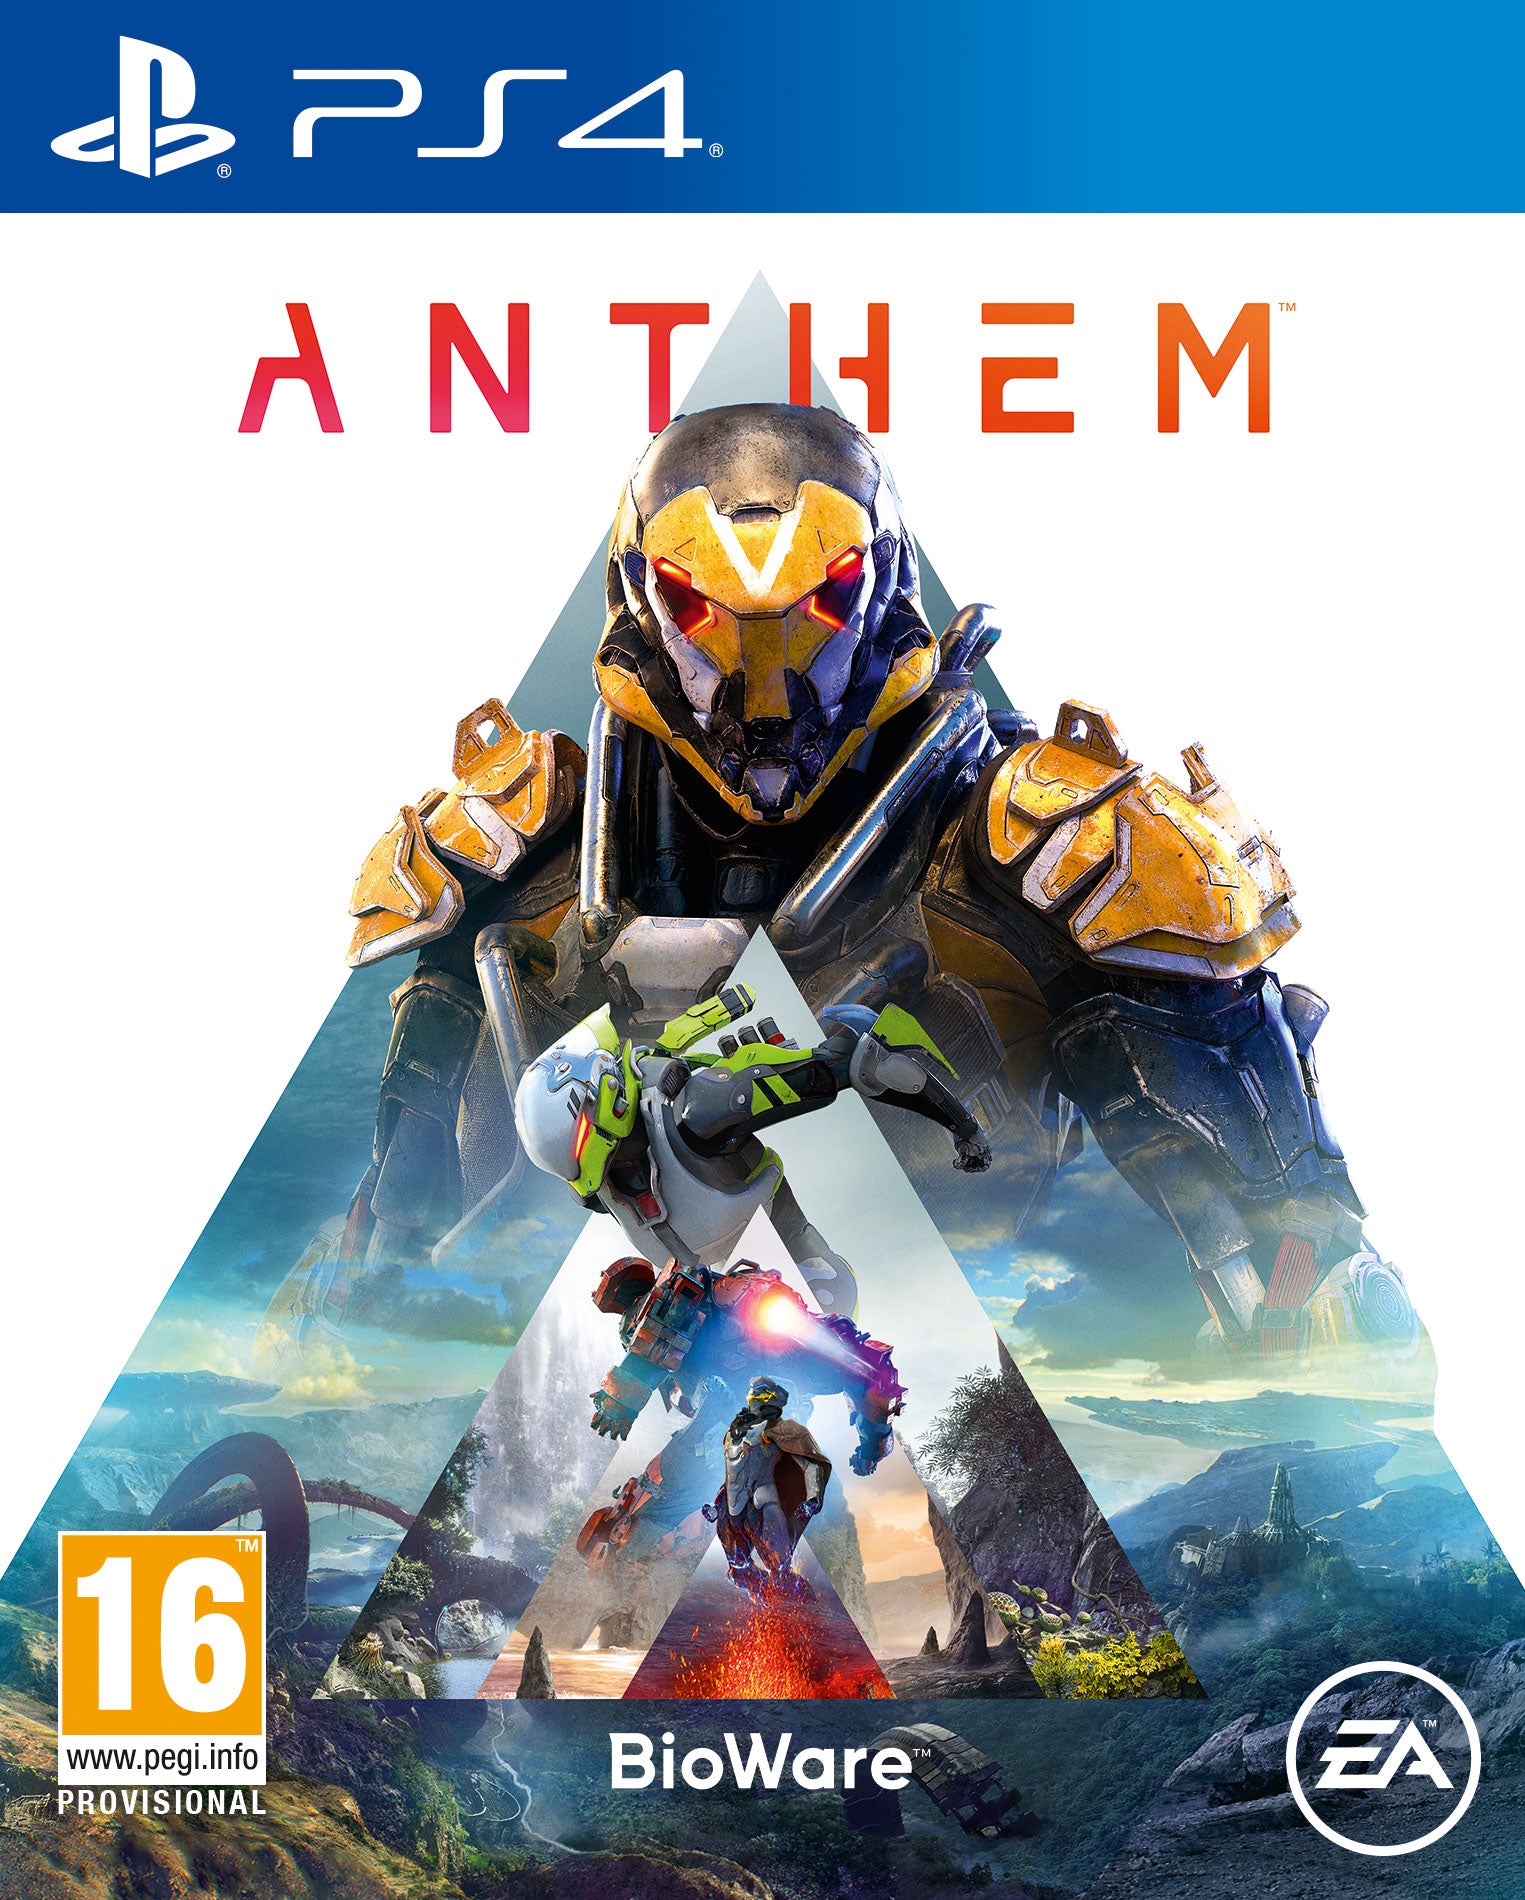 a video game cover with a yellow robot